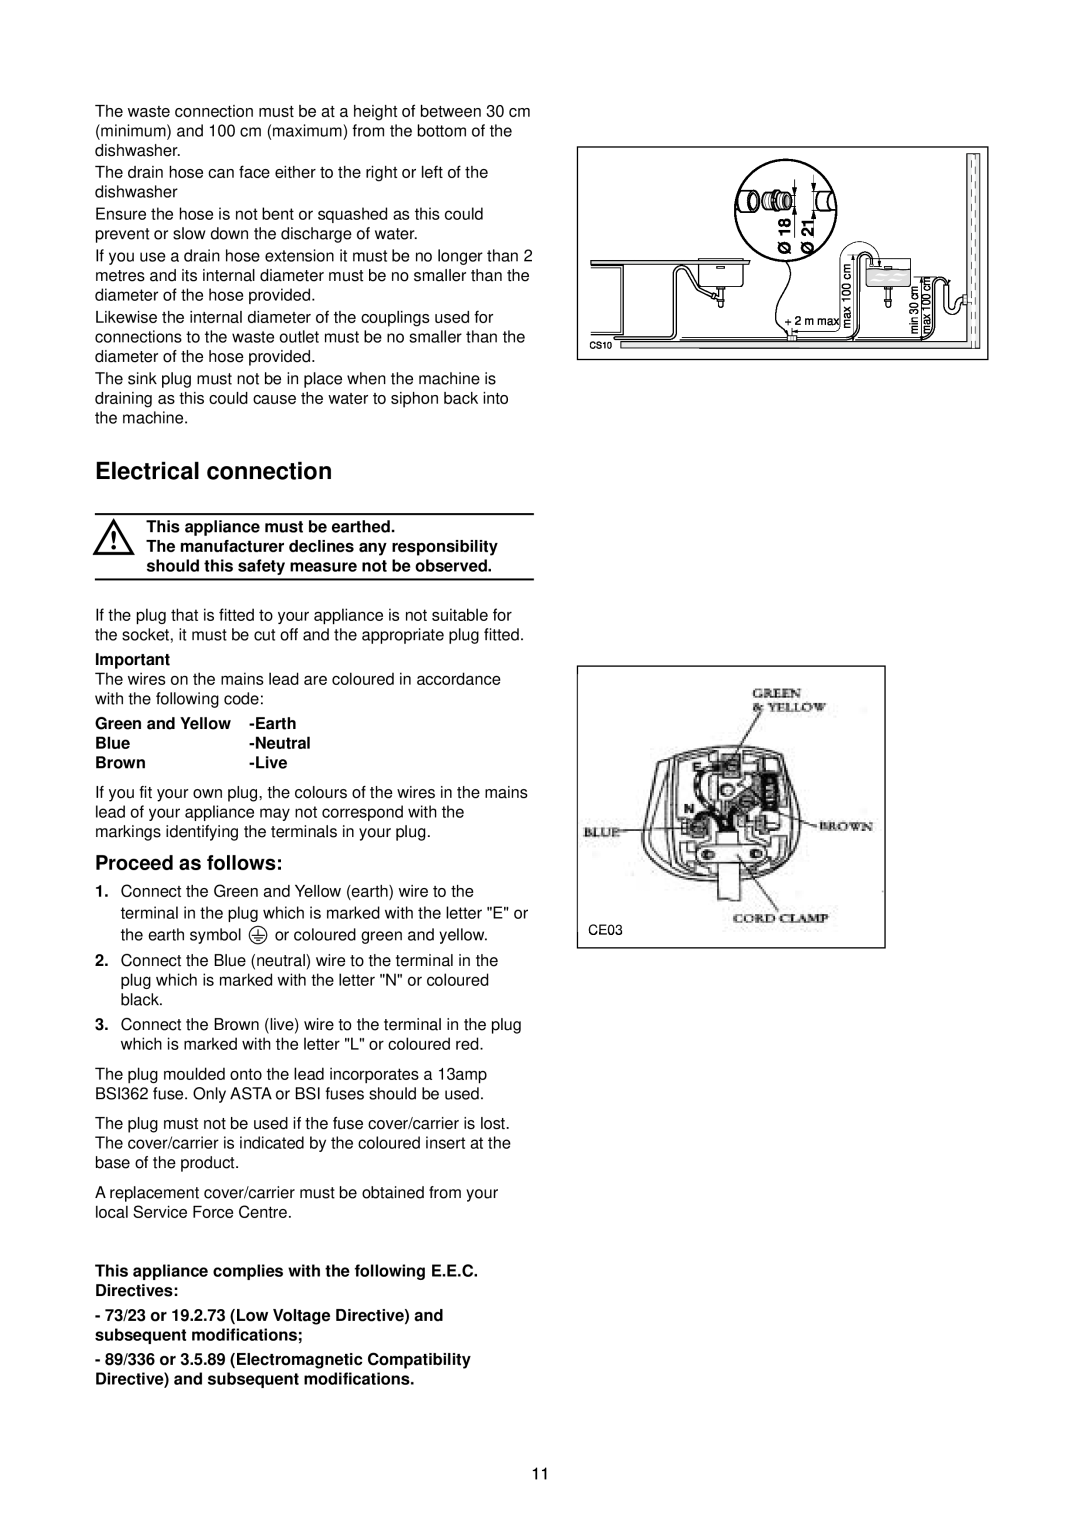 Zanussi DA 6141 Electrical connection, Proceed as follows, This appliance must be earthed, Earth, Blue, Brown, Live, CE03 